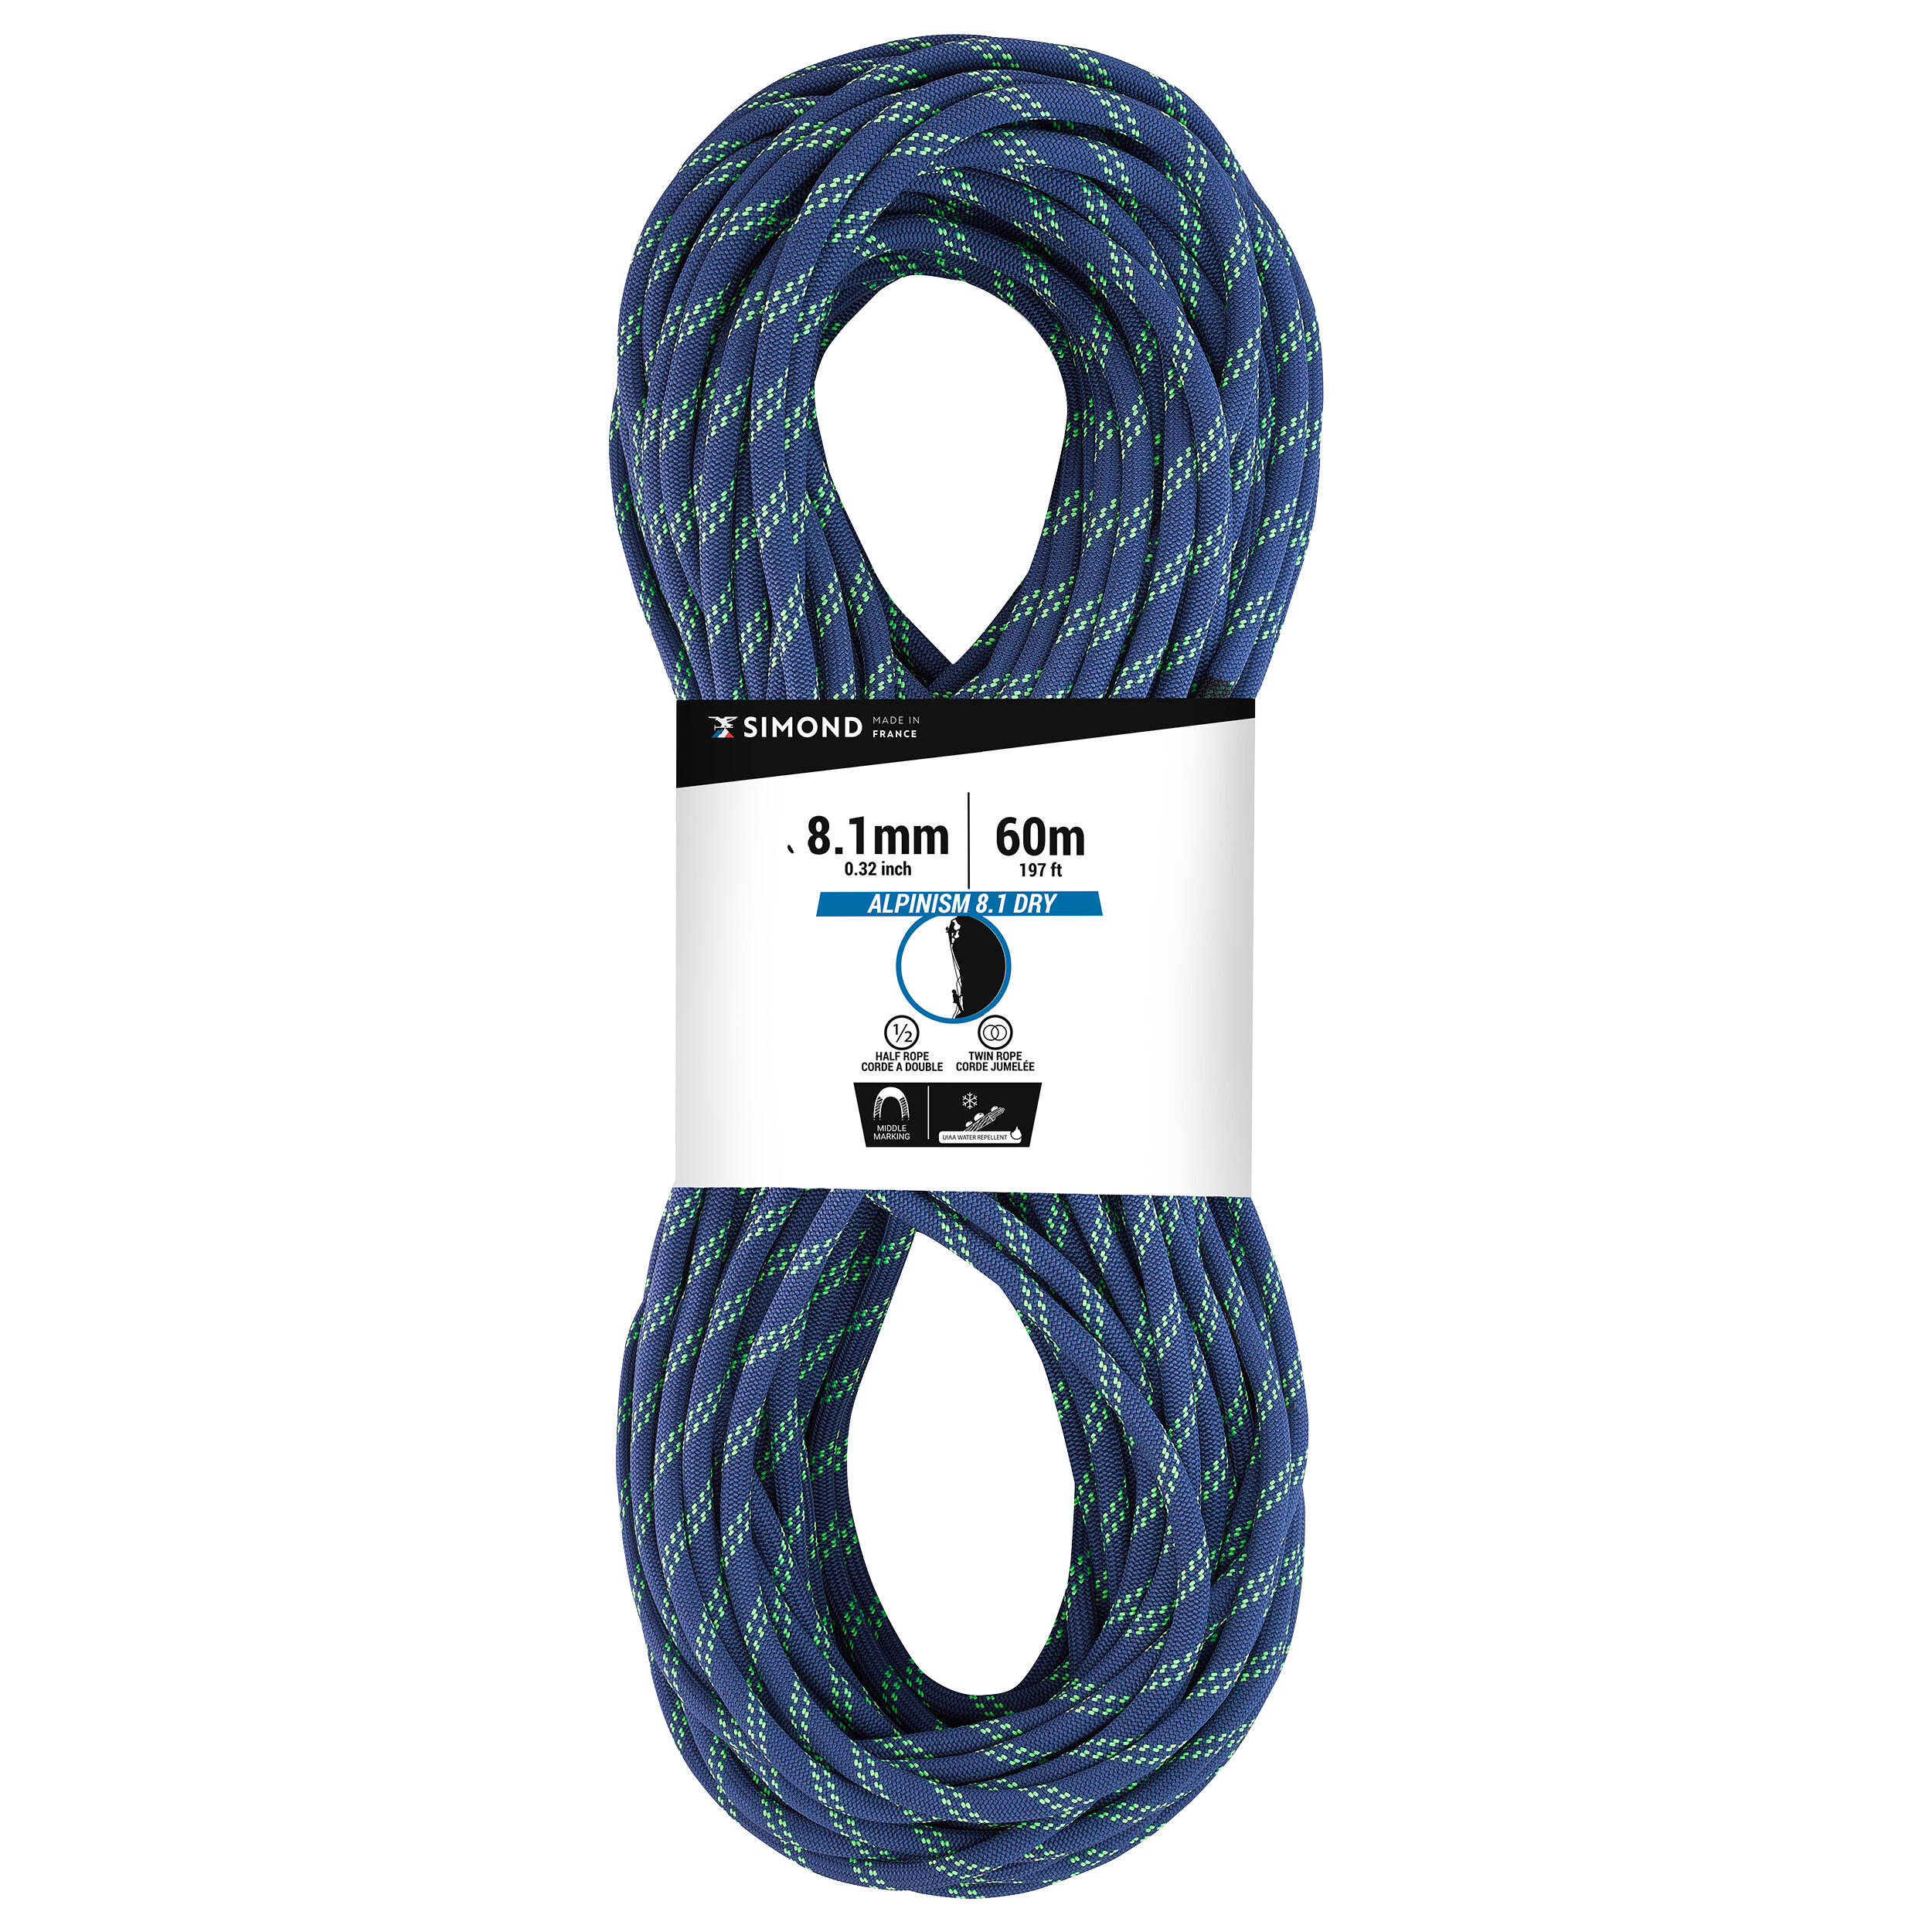 CLIMBING AND MOUNTAINEERING HALF ROPE - ABSEIL ALPINISM 8.1 MM X 60M BLUE 1/4